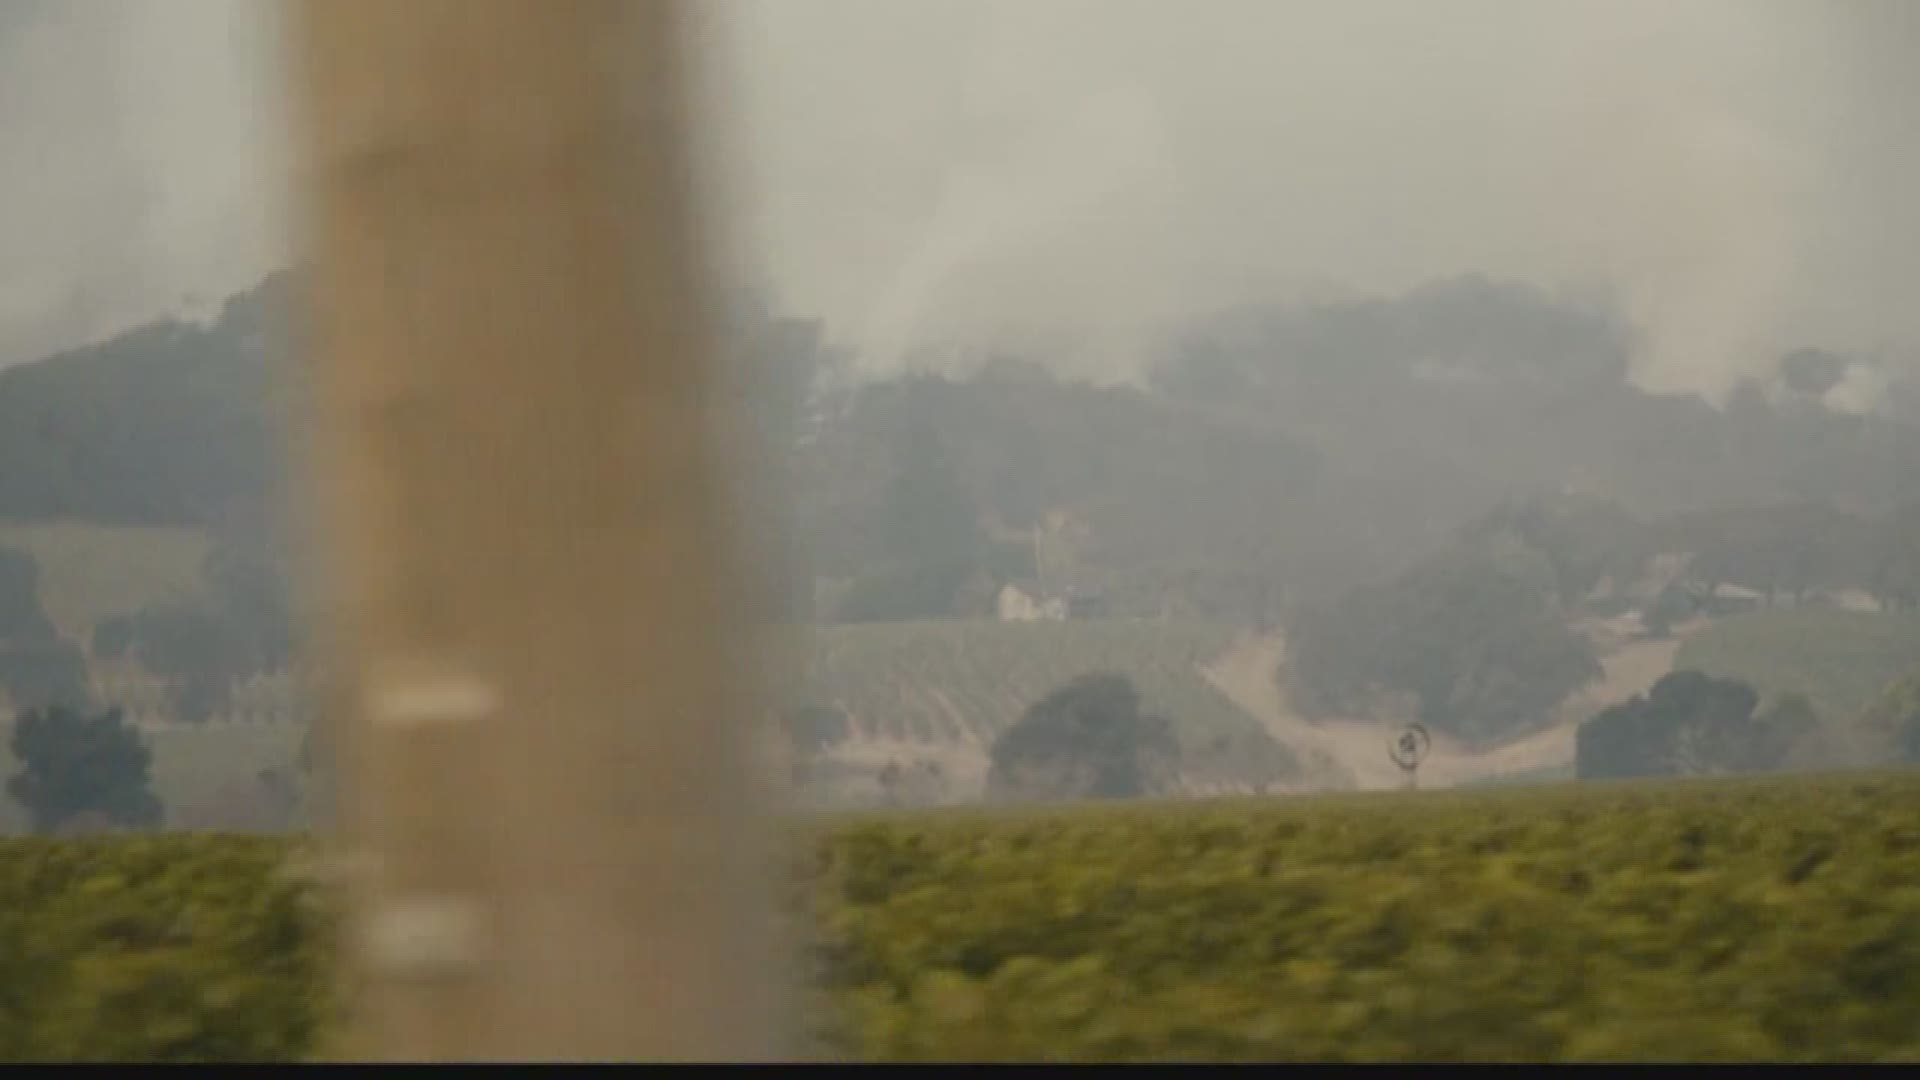 In Napa county, residents watch in shock as fires sweep through their community. 